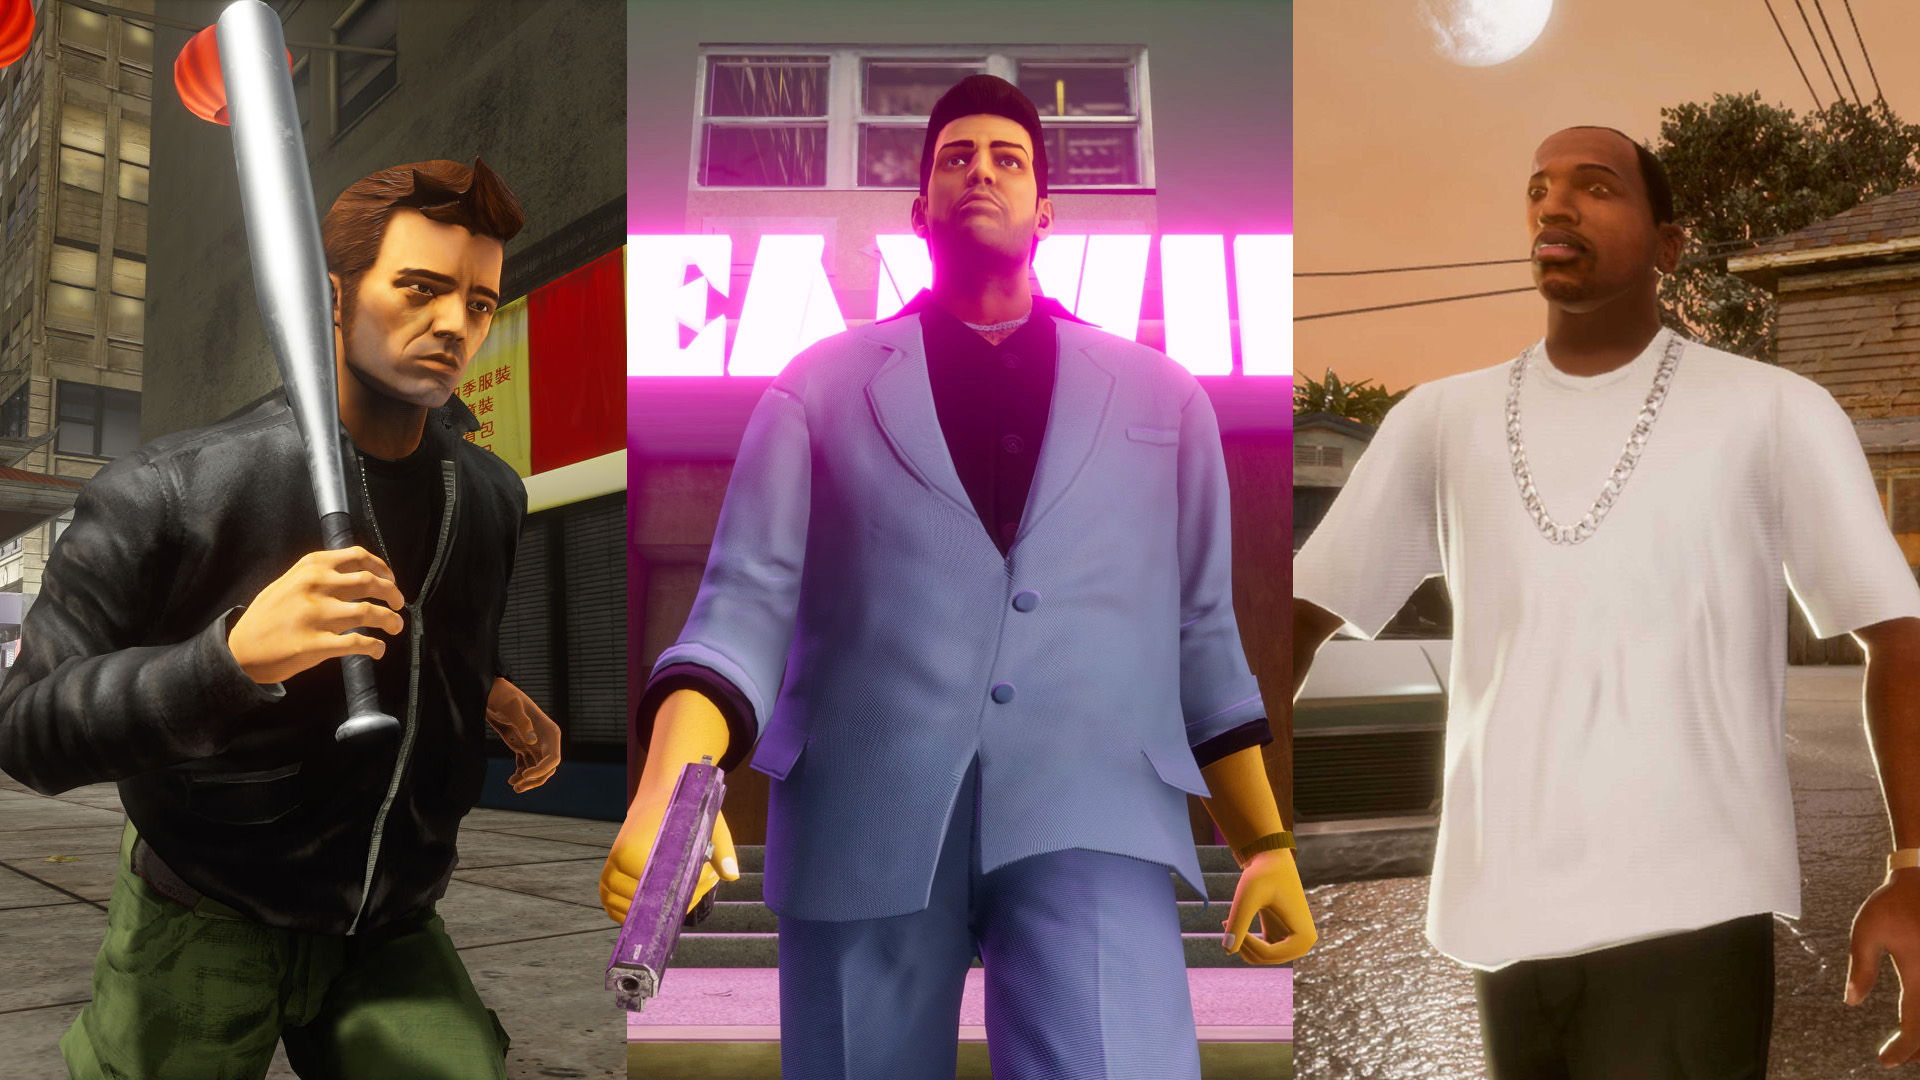 Grand Theft Auto: The Trilogy - The Definitive Edition' Review: A Wasted  Opportunity